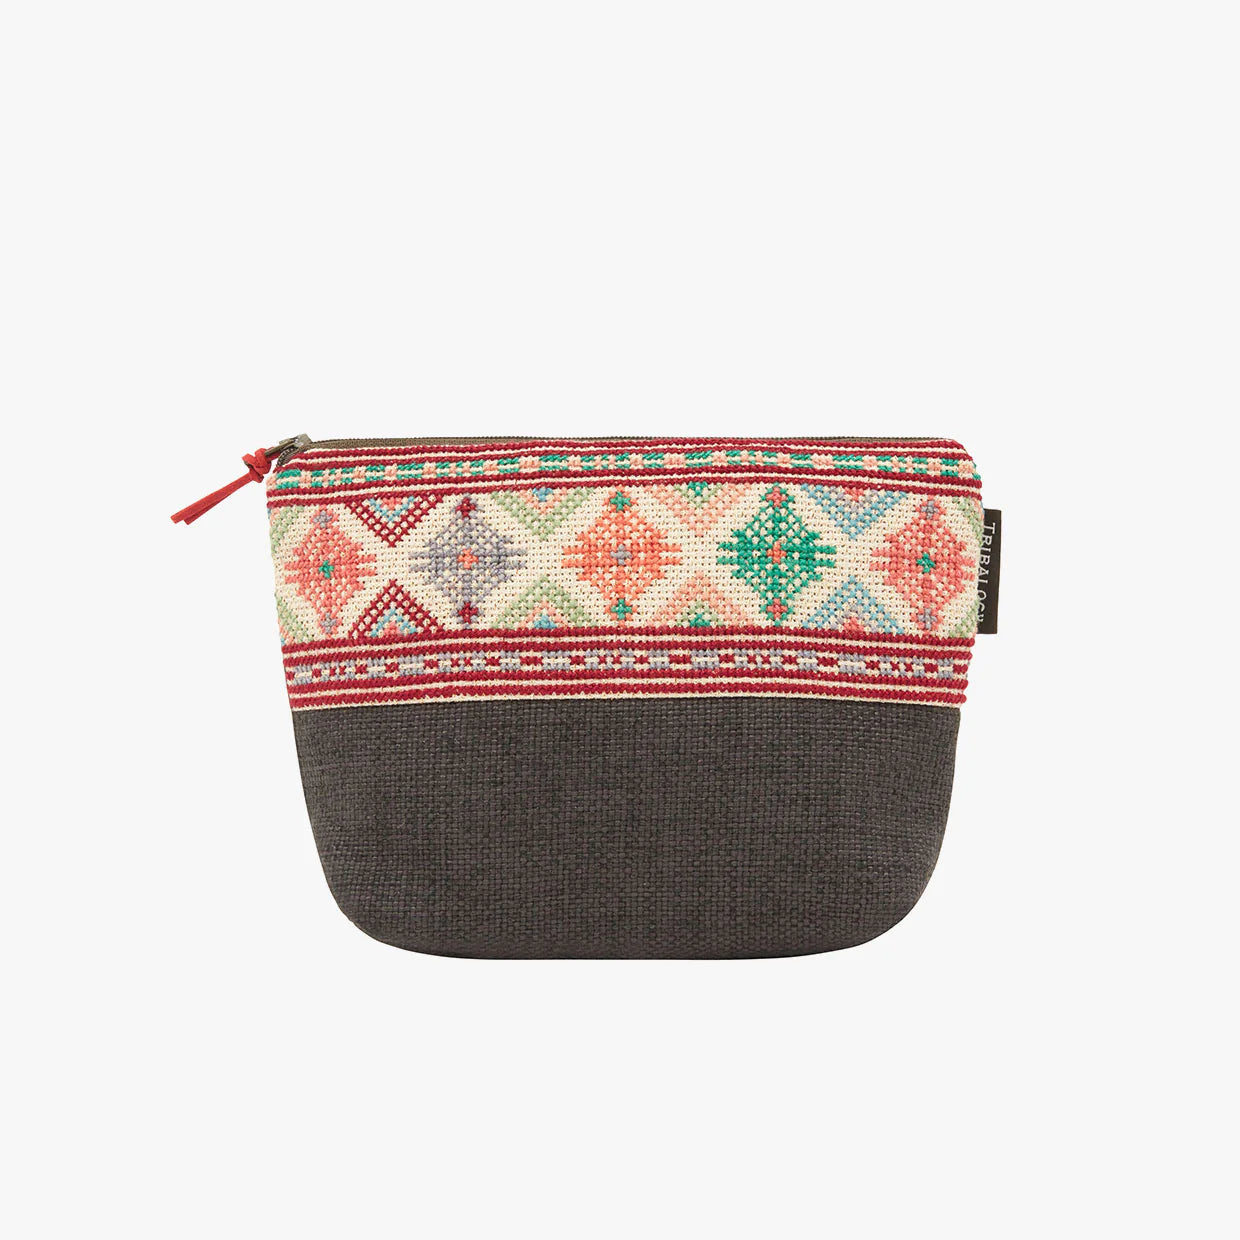 Yadawee Hand Embroidered Charcoal Make Up Pouch